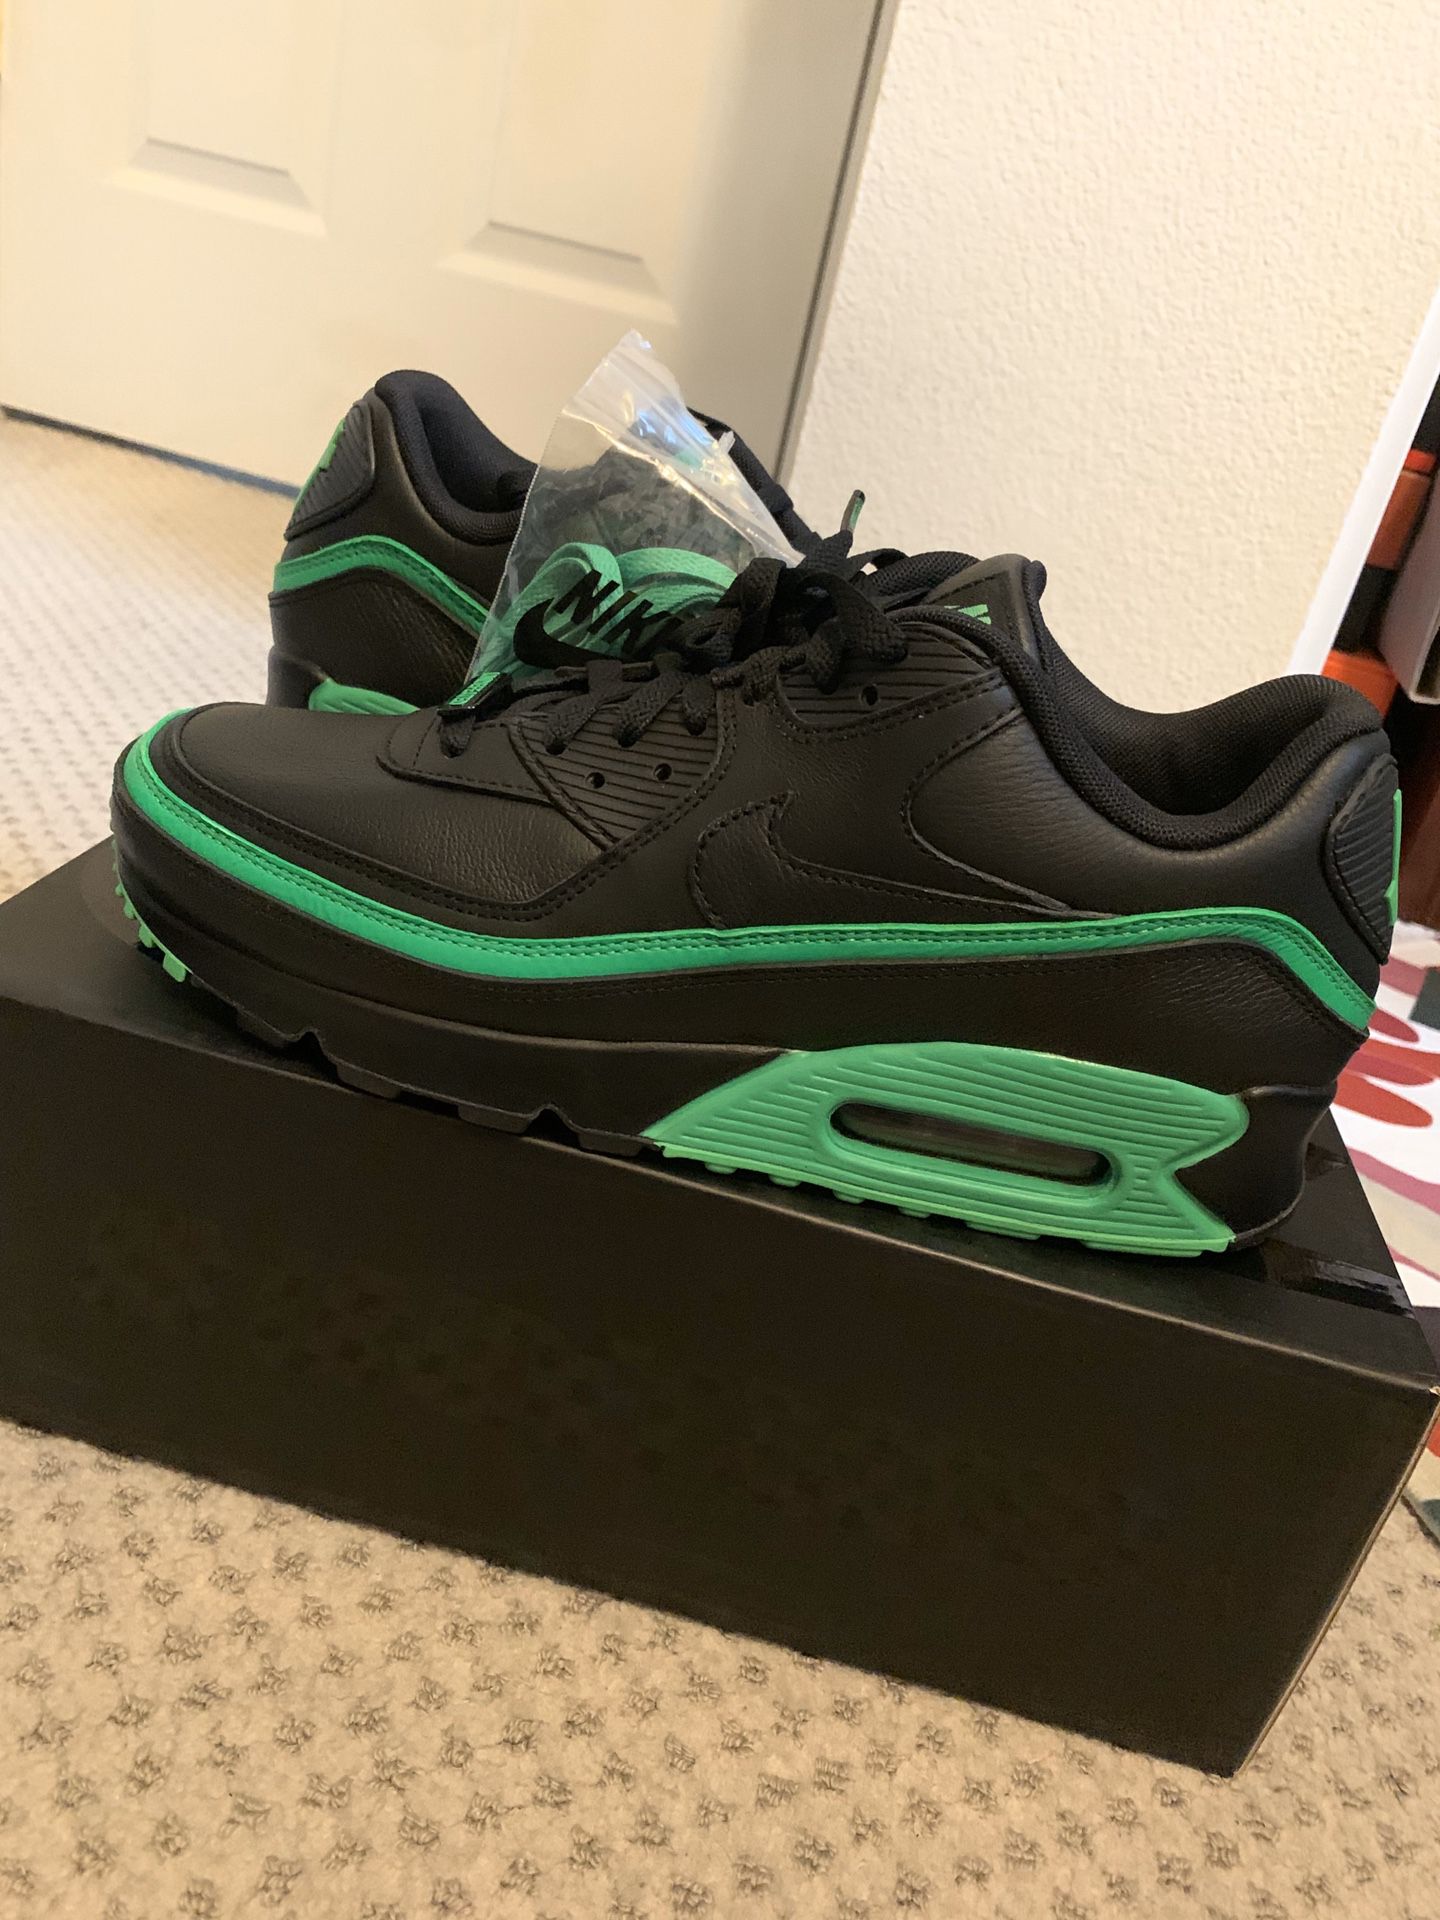 Undefeated Nike Air Max 90